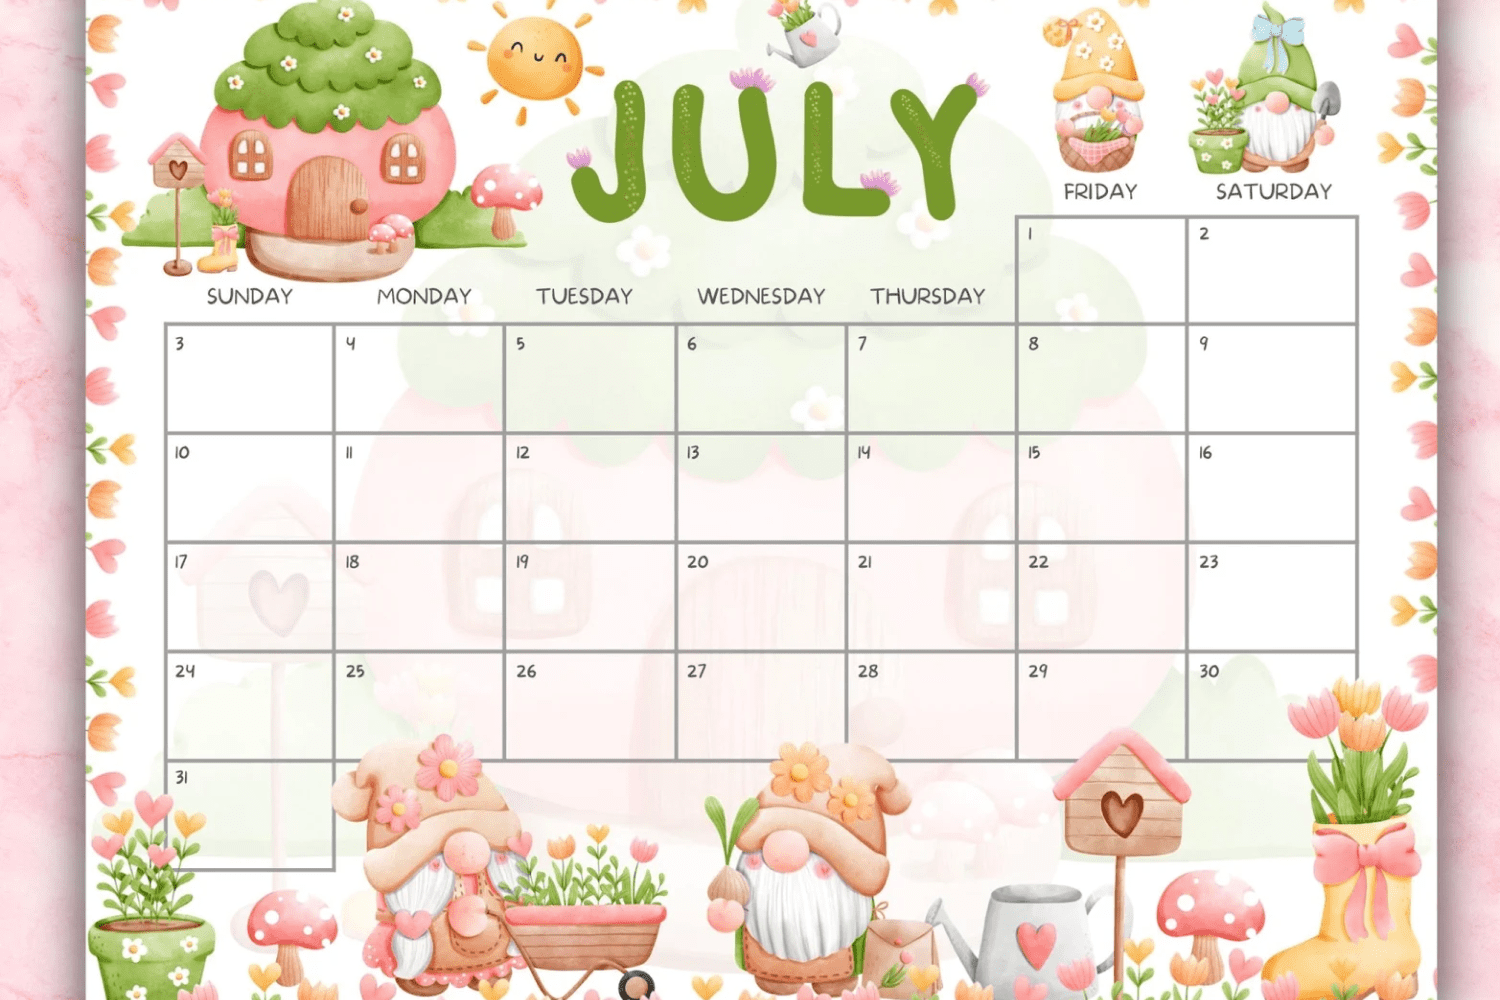 Bright calendar with gnomes and a toy house.